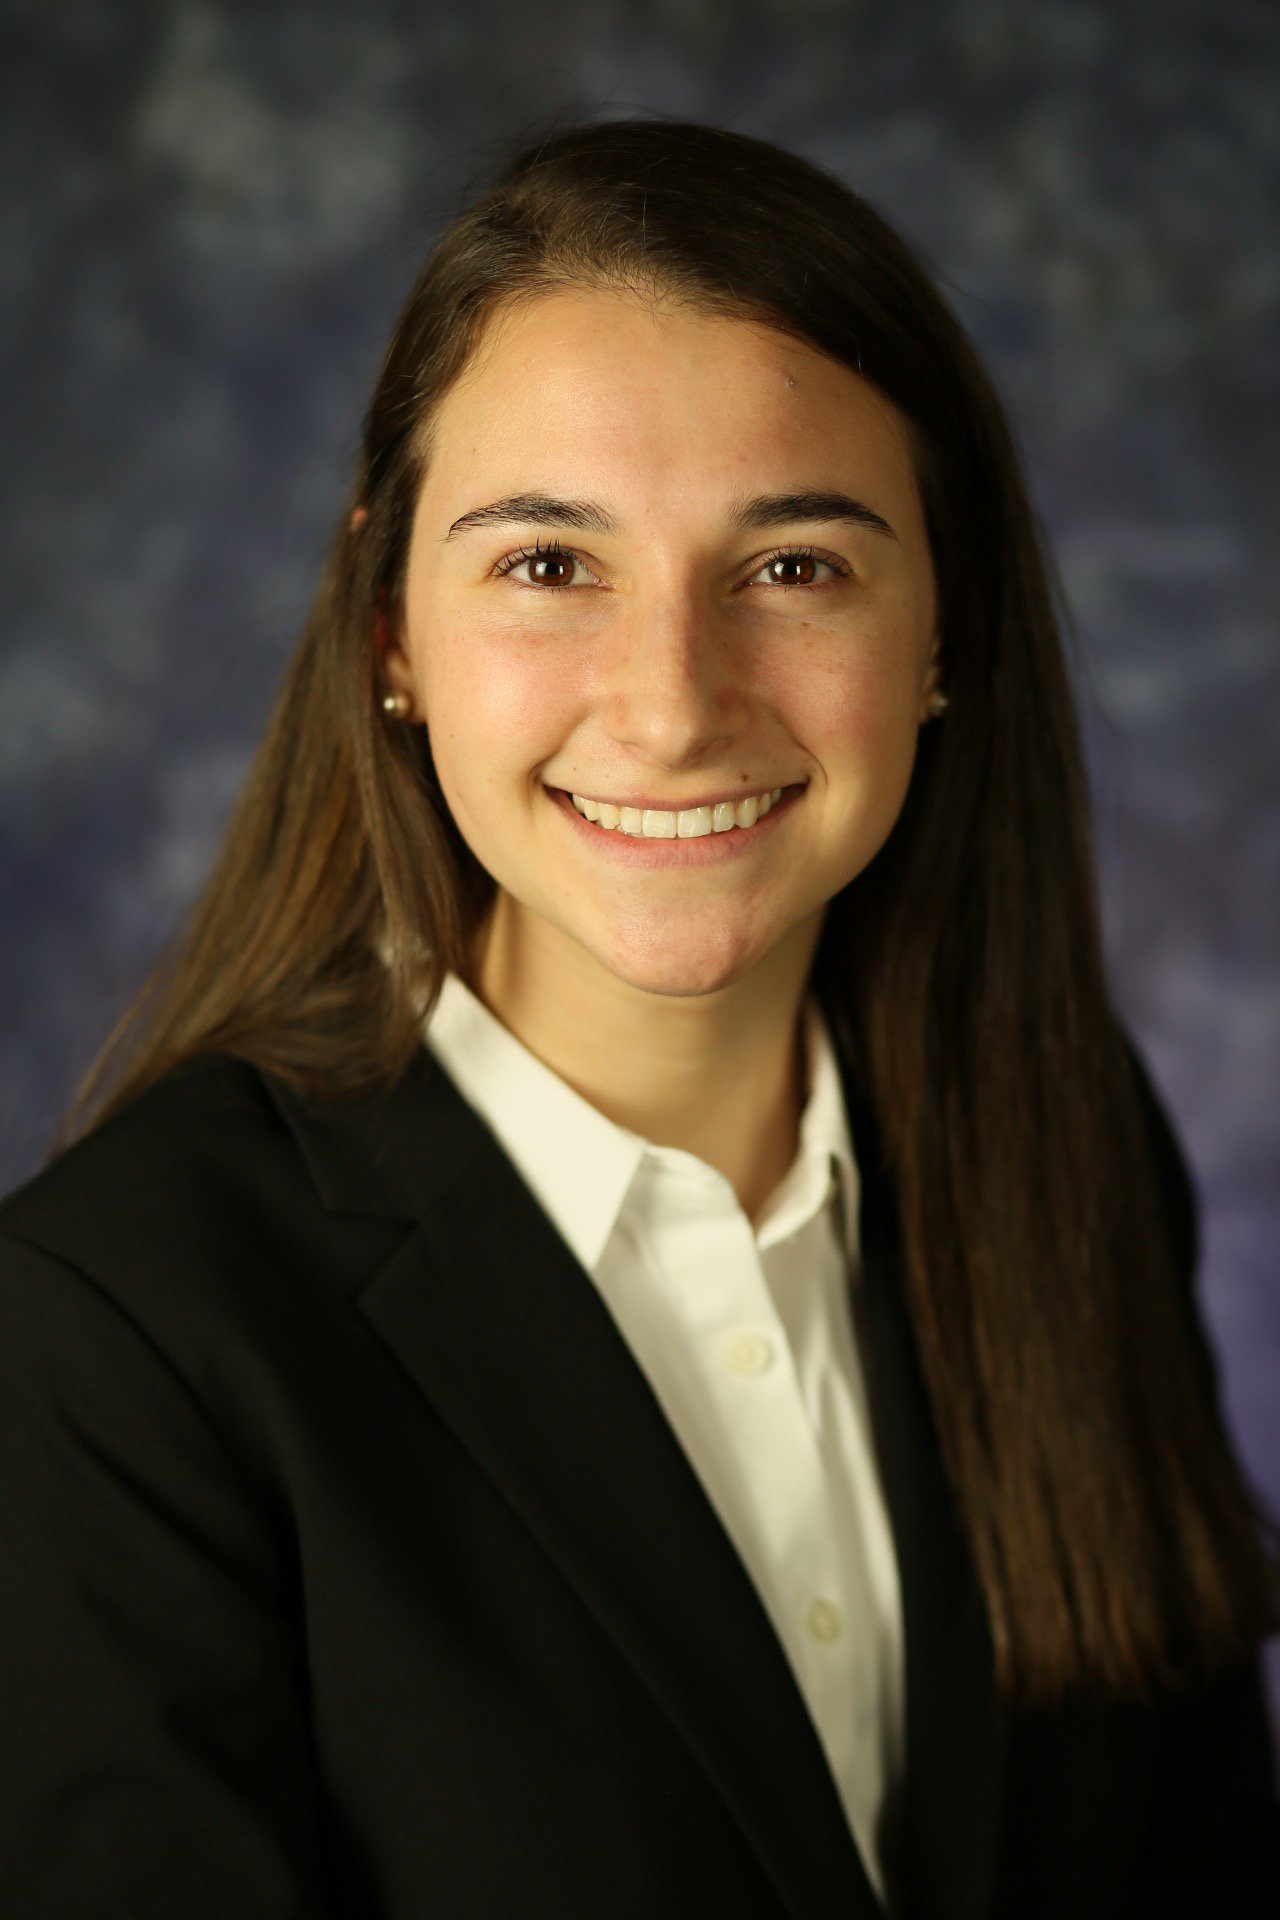 Penn State WIB on X: Its our pleasure to introduce Rebecca Mongeluzi as  WIB's Member of the Month! Rebecca is a freshman from Berwyn, PA majoring  in Finance. Someday she hopes to